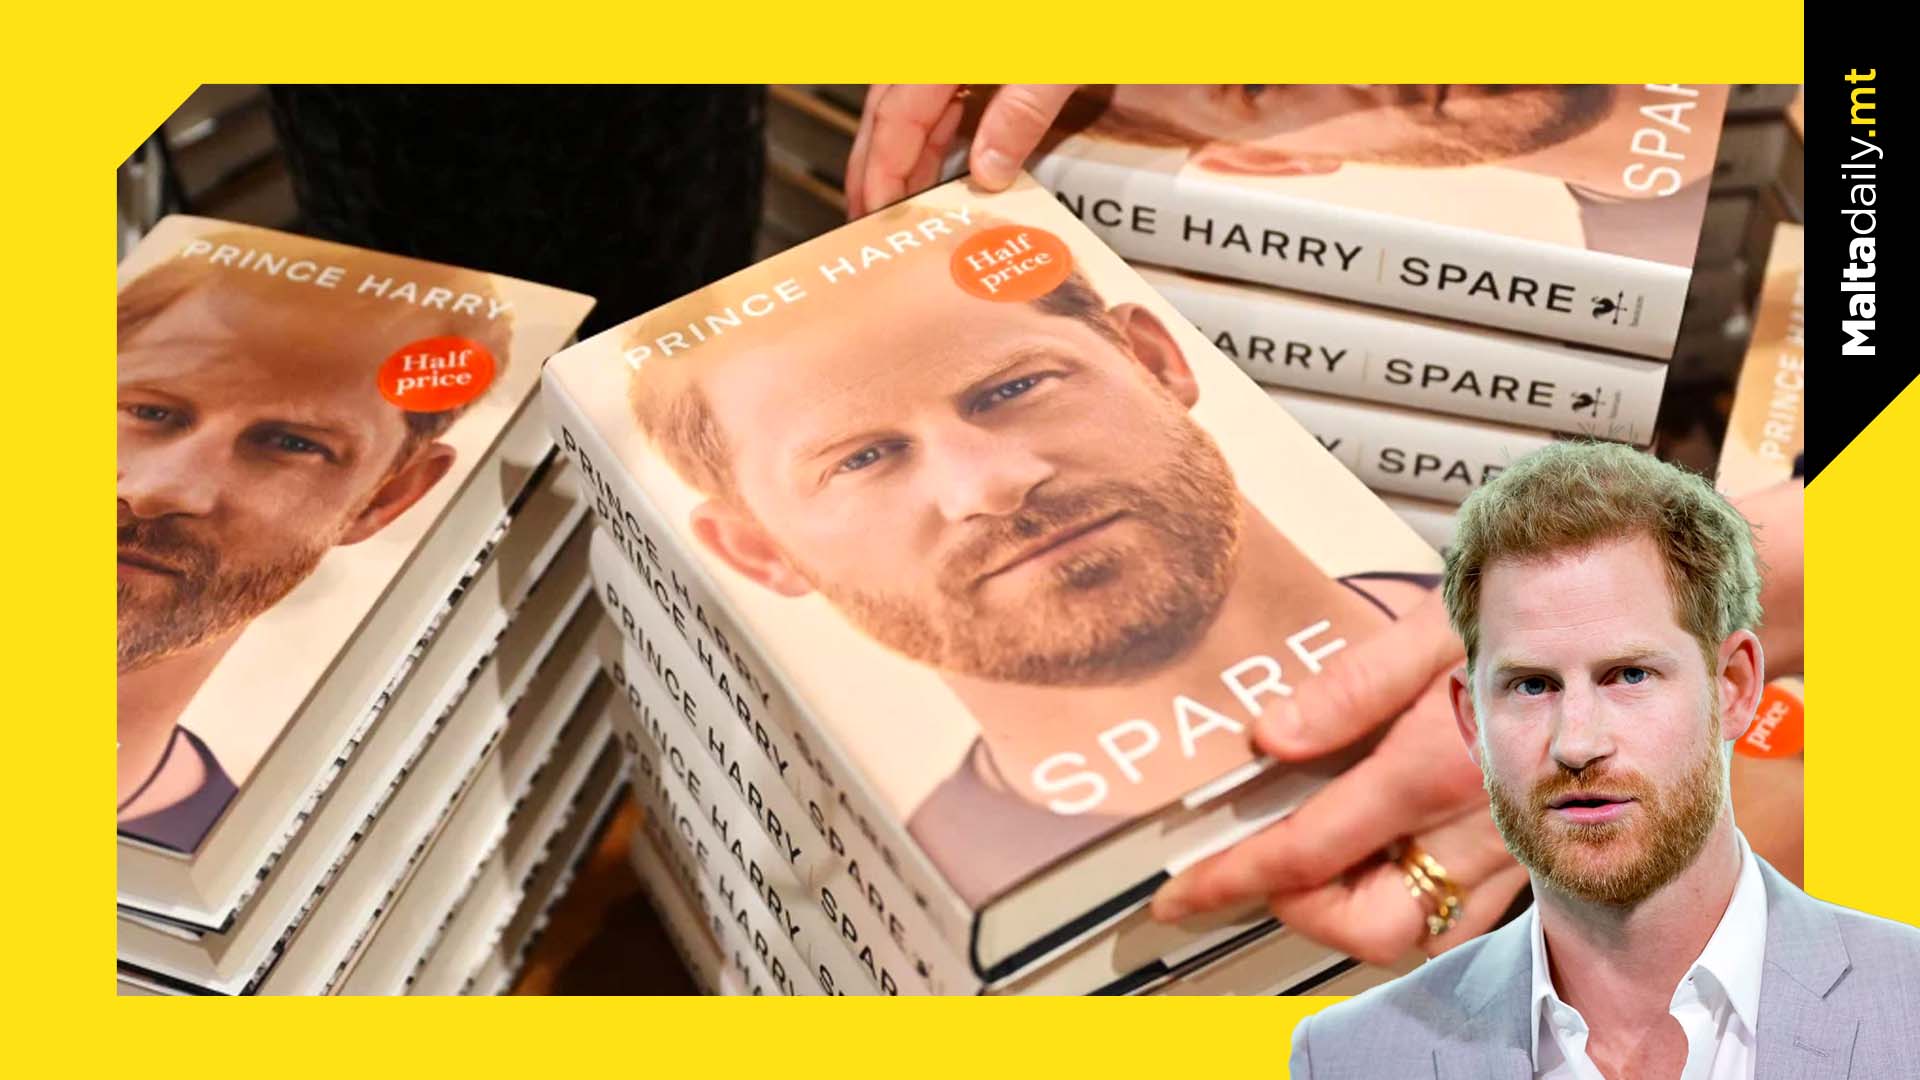 Prince Harry’s memoir ‘Spare’ fastest selling non-fiction book ever